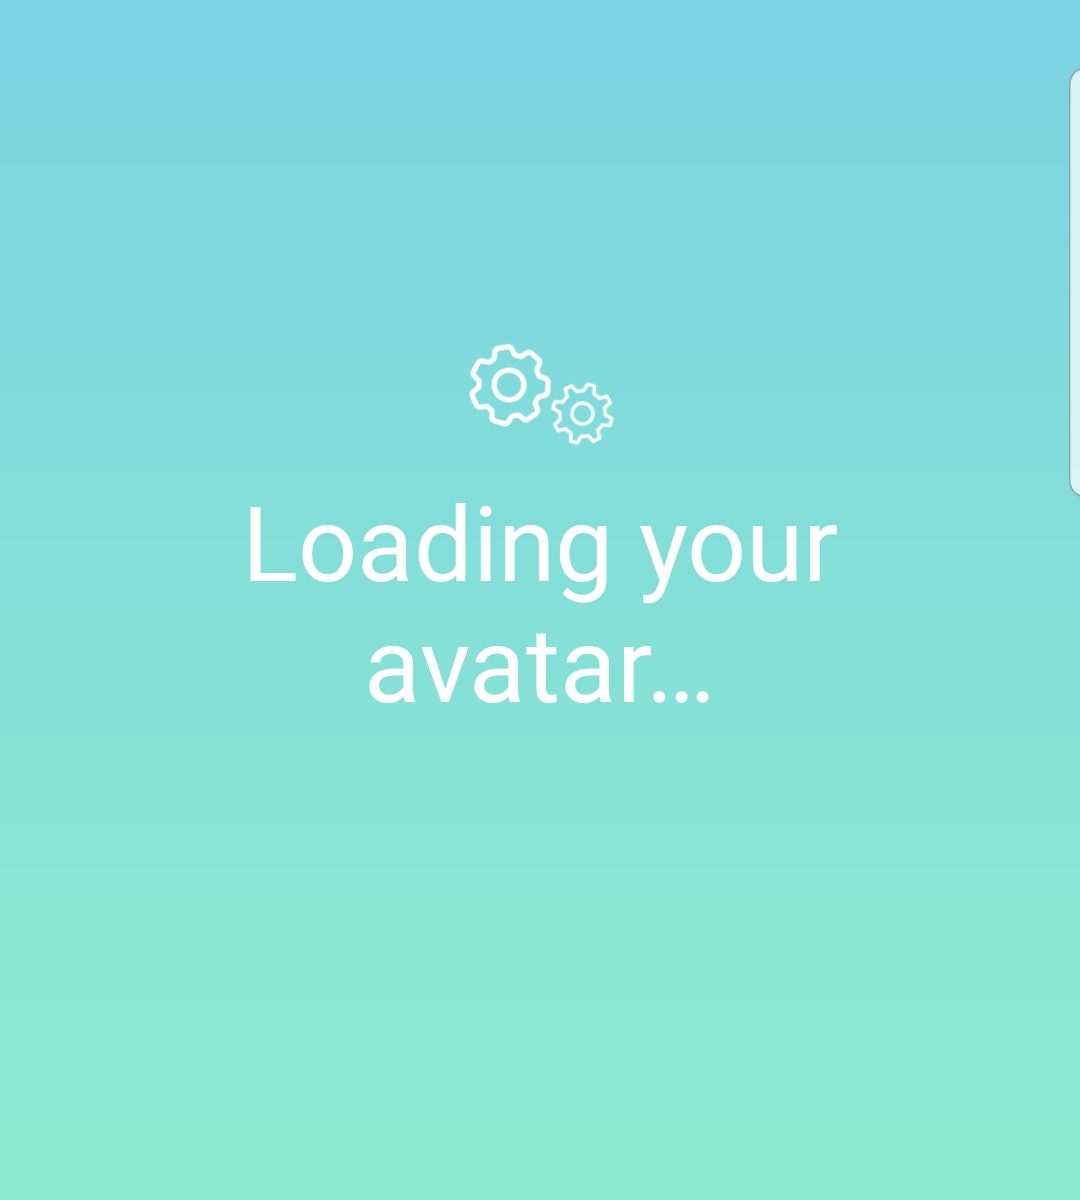 Loading your avatar...